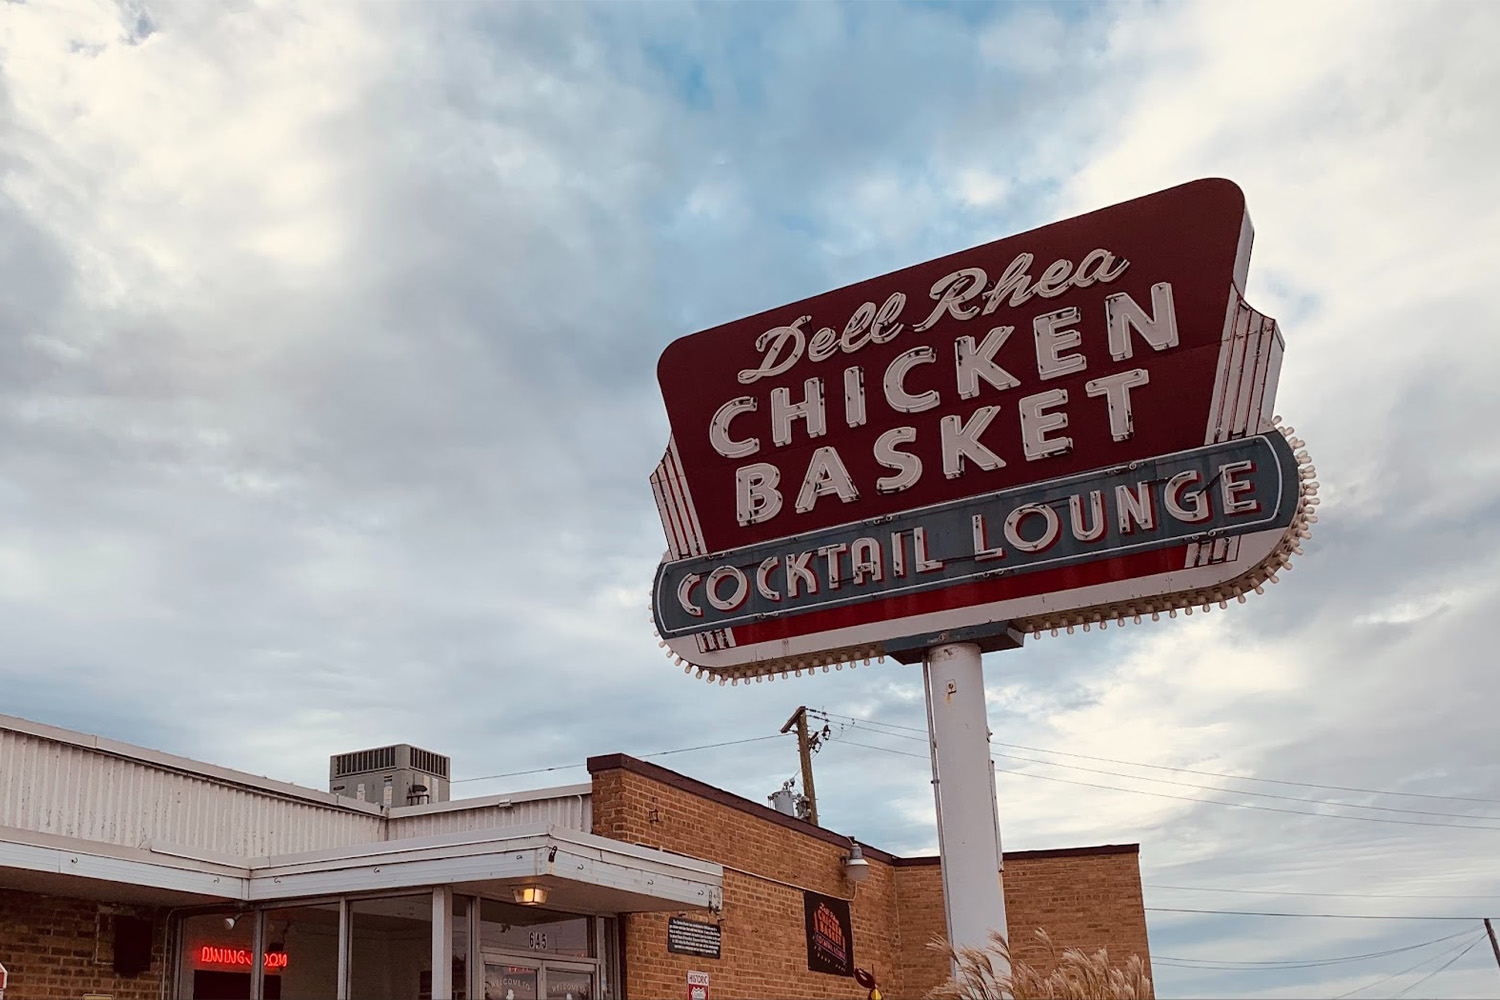 Dell Rhea’s Chicken Basket, Willowbrook, IL on Route 66